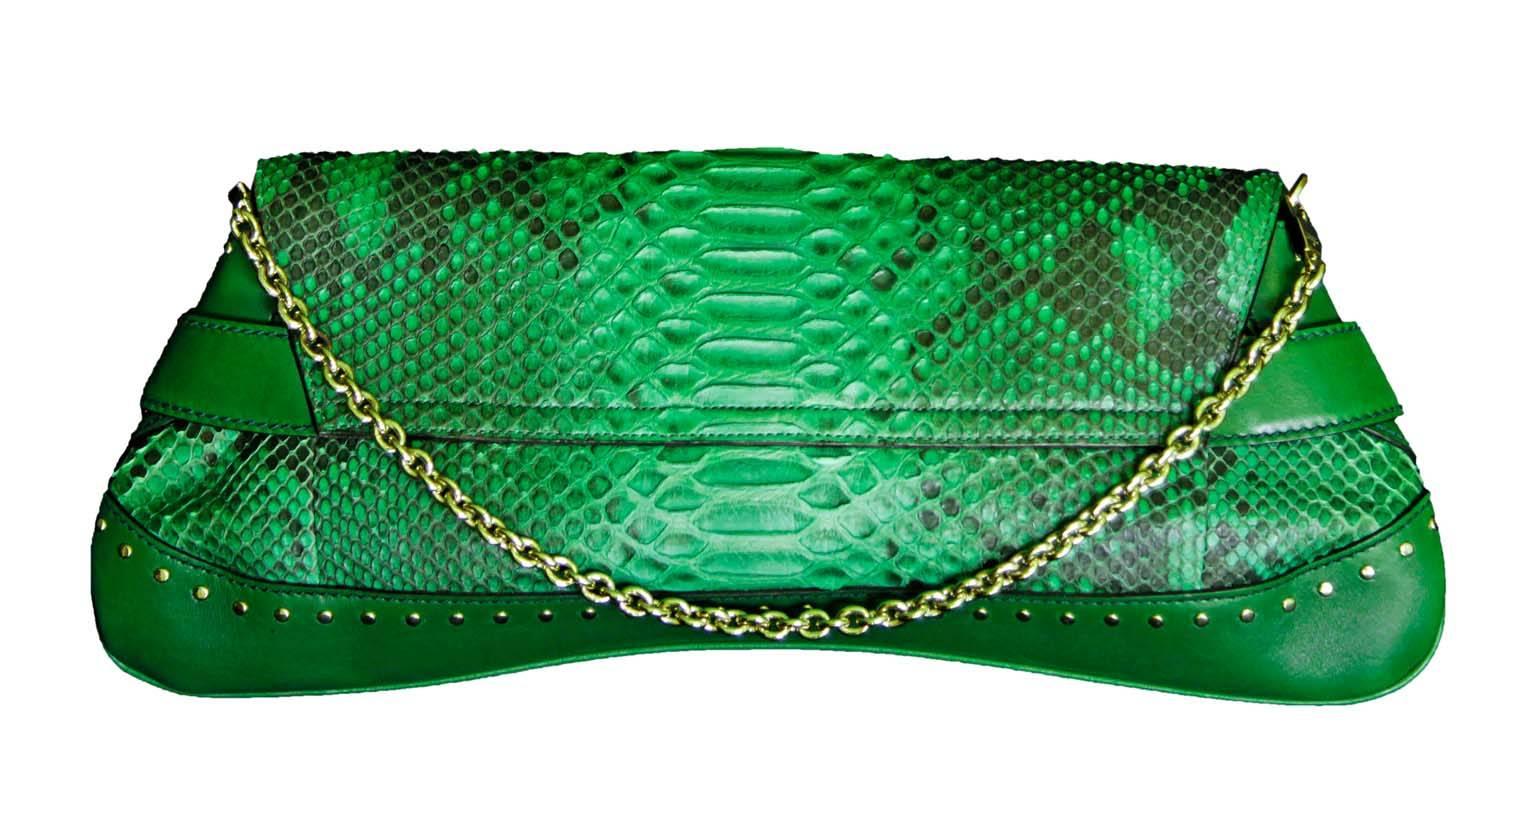 That Incredible Green Python Leather Horsebit Bag From Tom Ford's Gucci Spring Summer 2002 Collection!

This amazing bag has only been used a handful of times & is in very good condition with only minimal signs of wear throughout... an